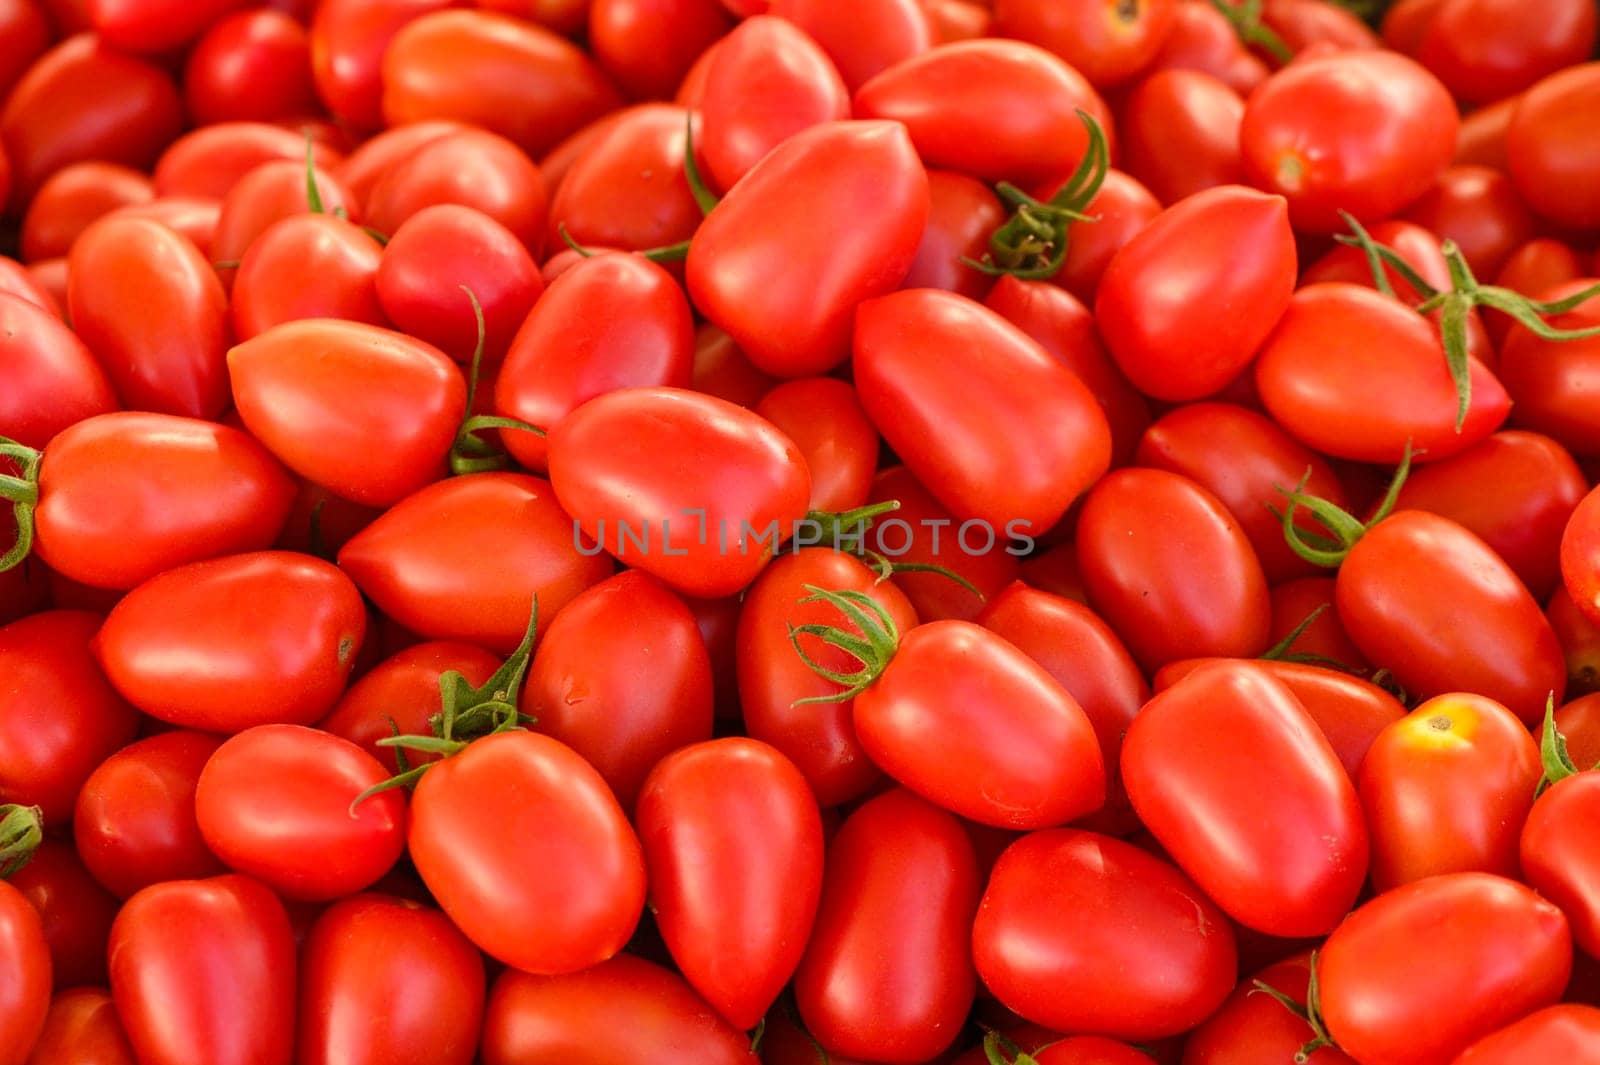 juicy tomatoes at the local market 1 by Mixa74